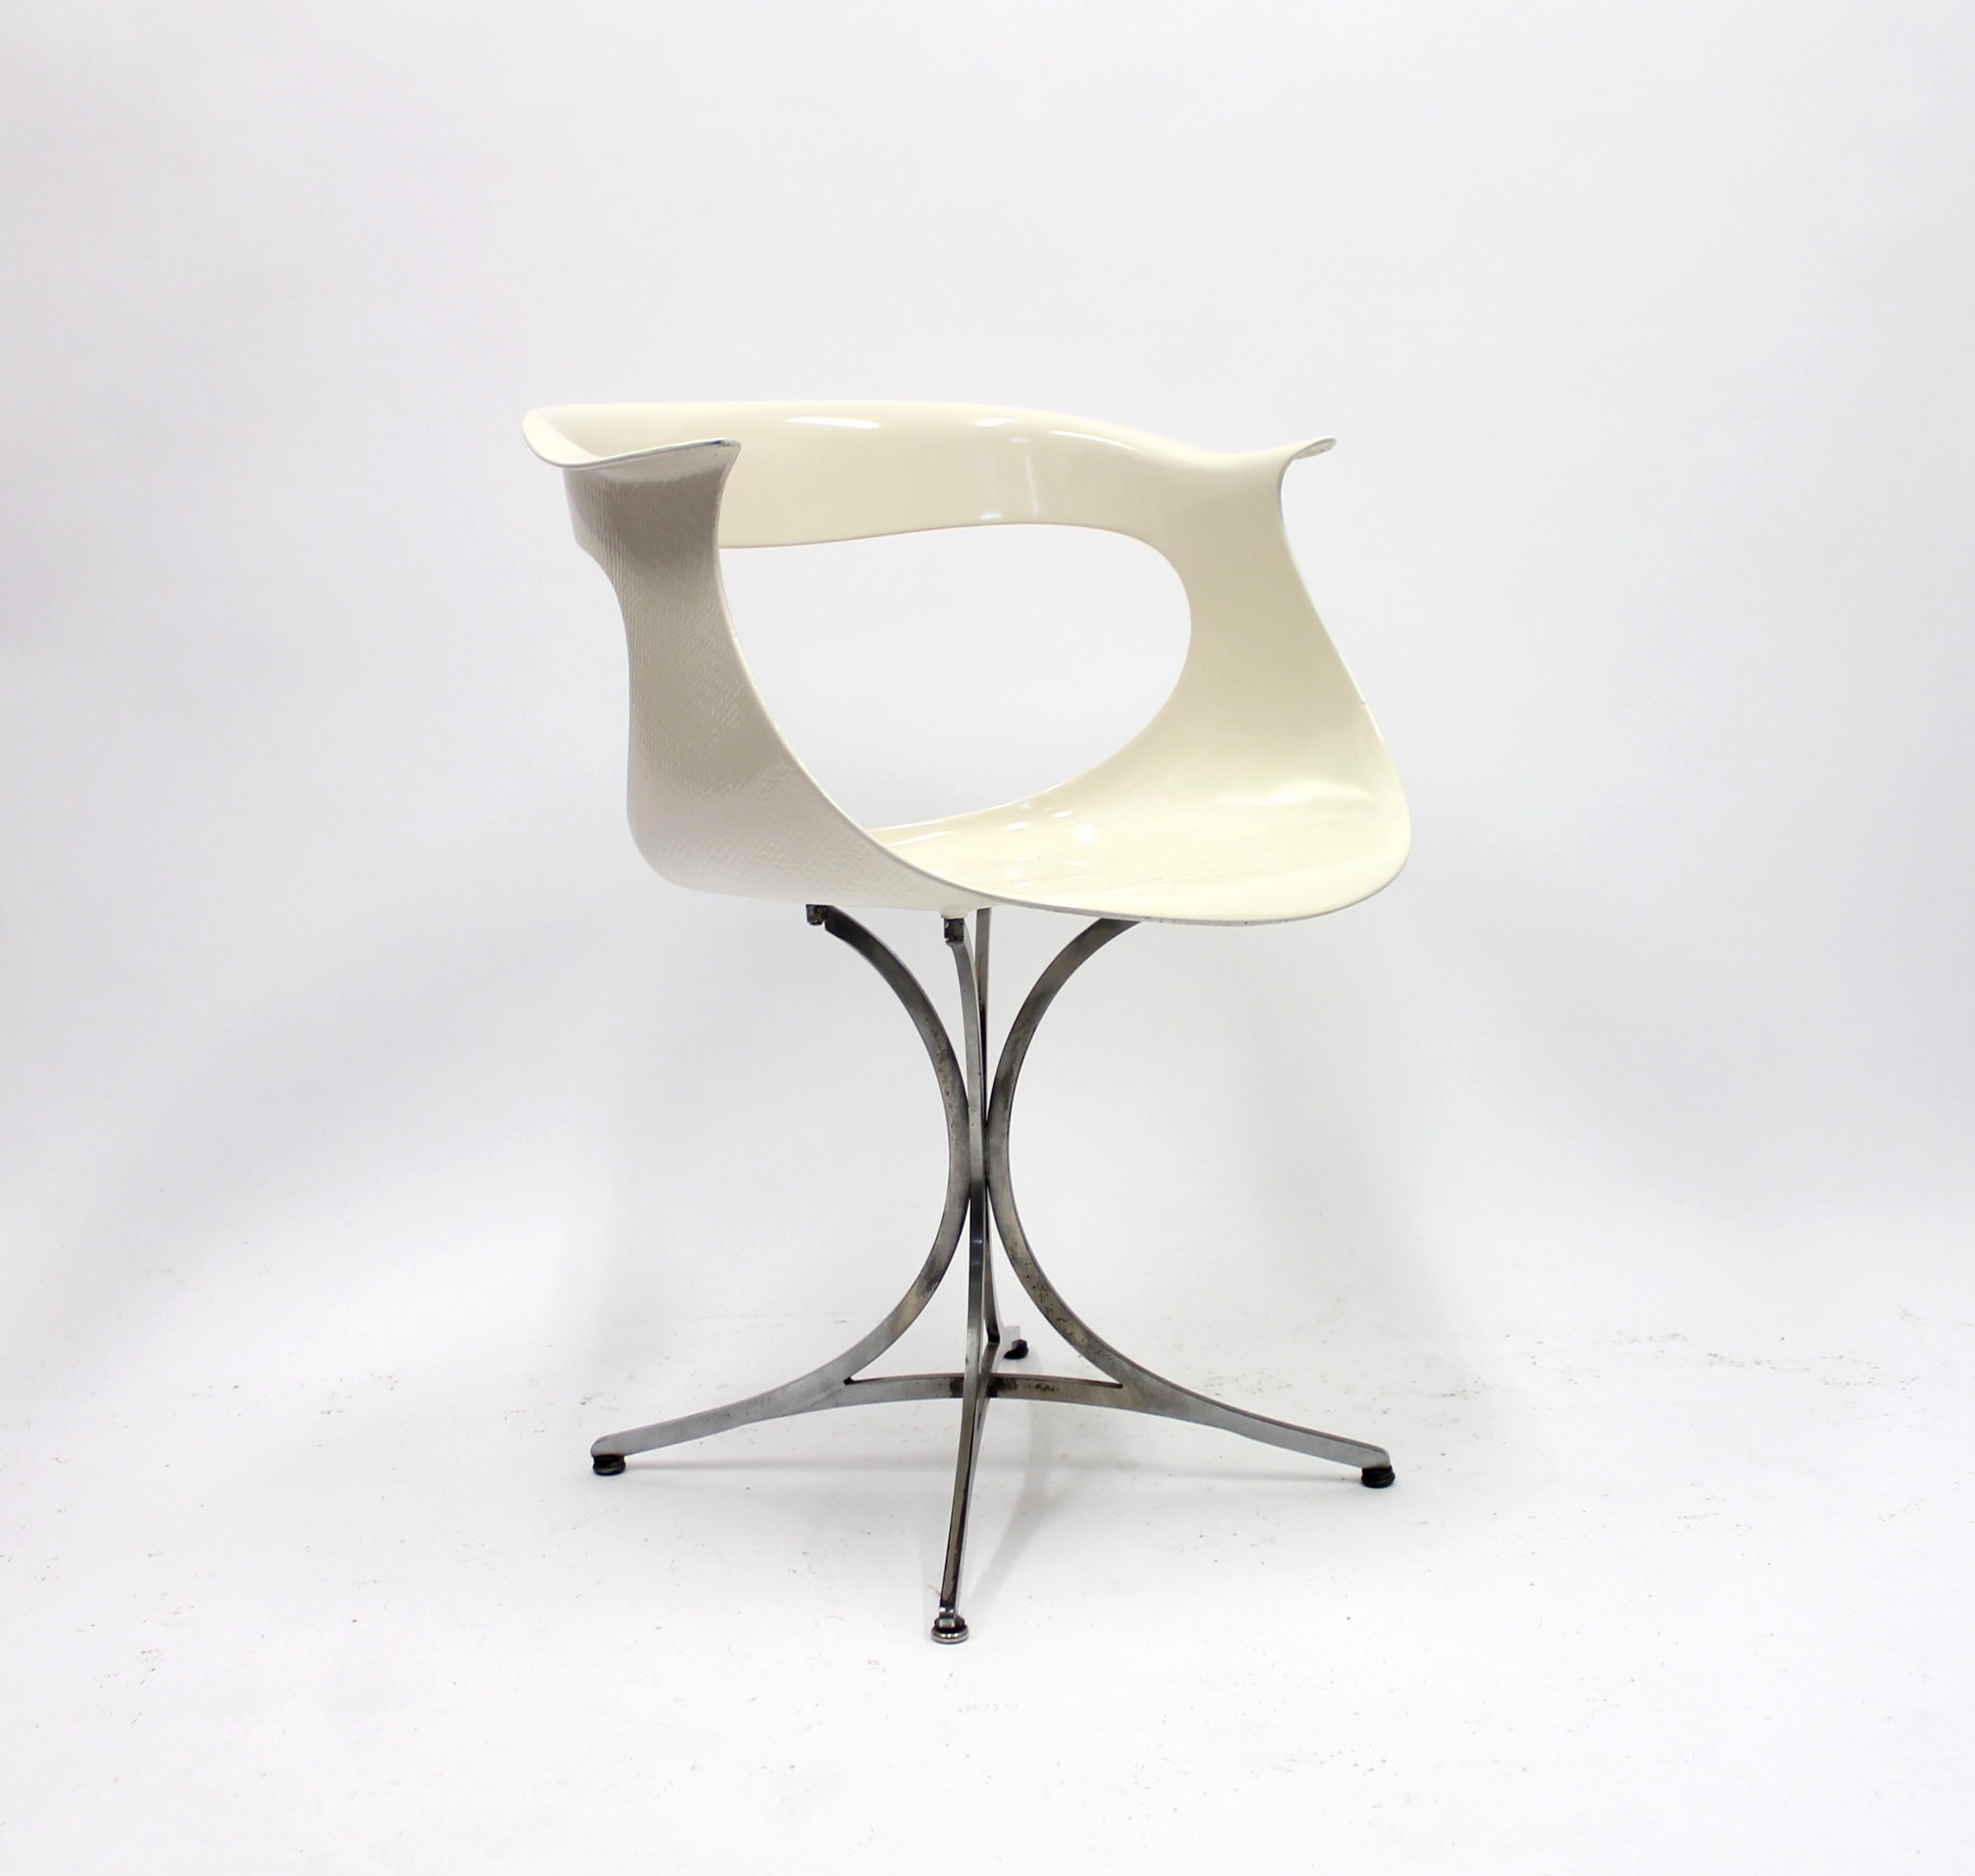 Lotus chair by husband and wife team Erwine & Estelle Laverne for their own company Laverne International. This piece was designed in the 1960s and has a really sense of space age design about it. A few very small crack occurs on the top of the